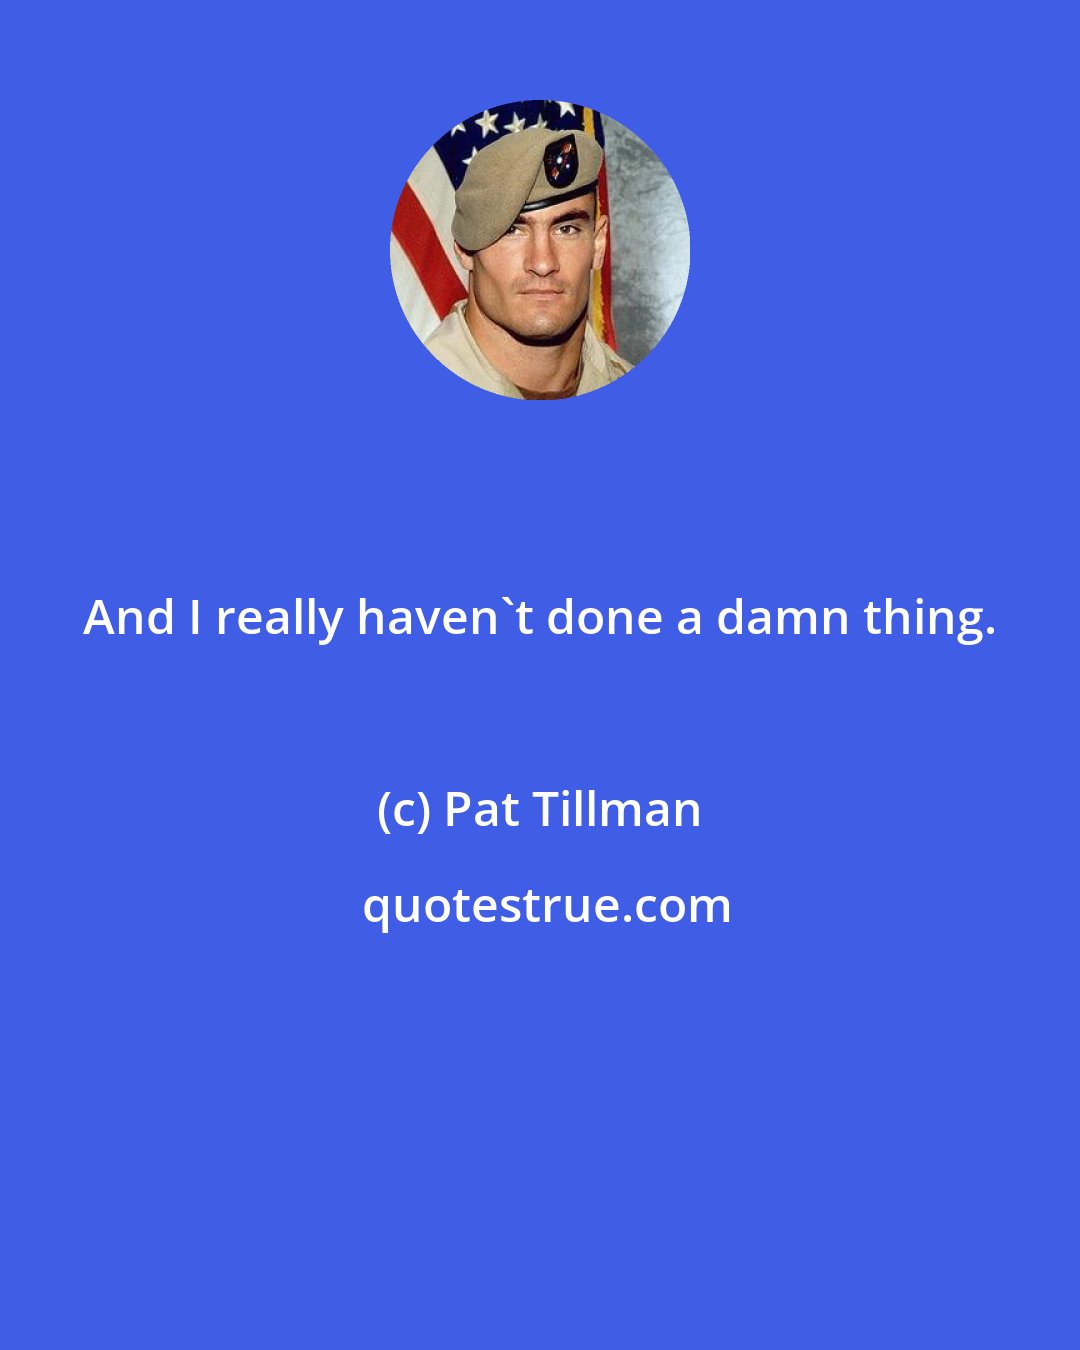 Pat Tillman: And I really haven't done a damn thing.